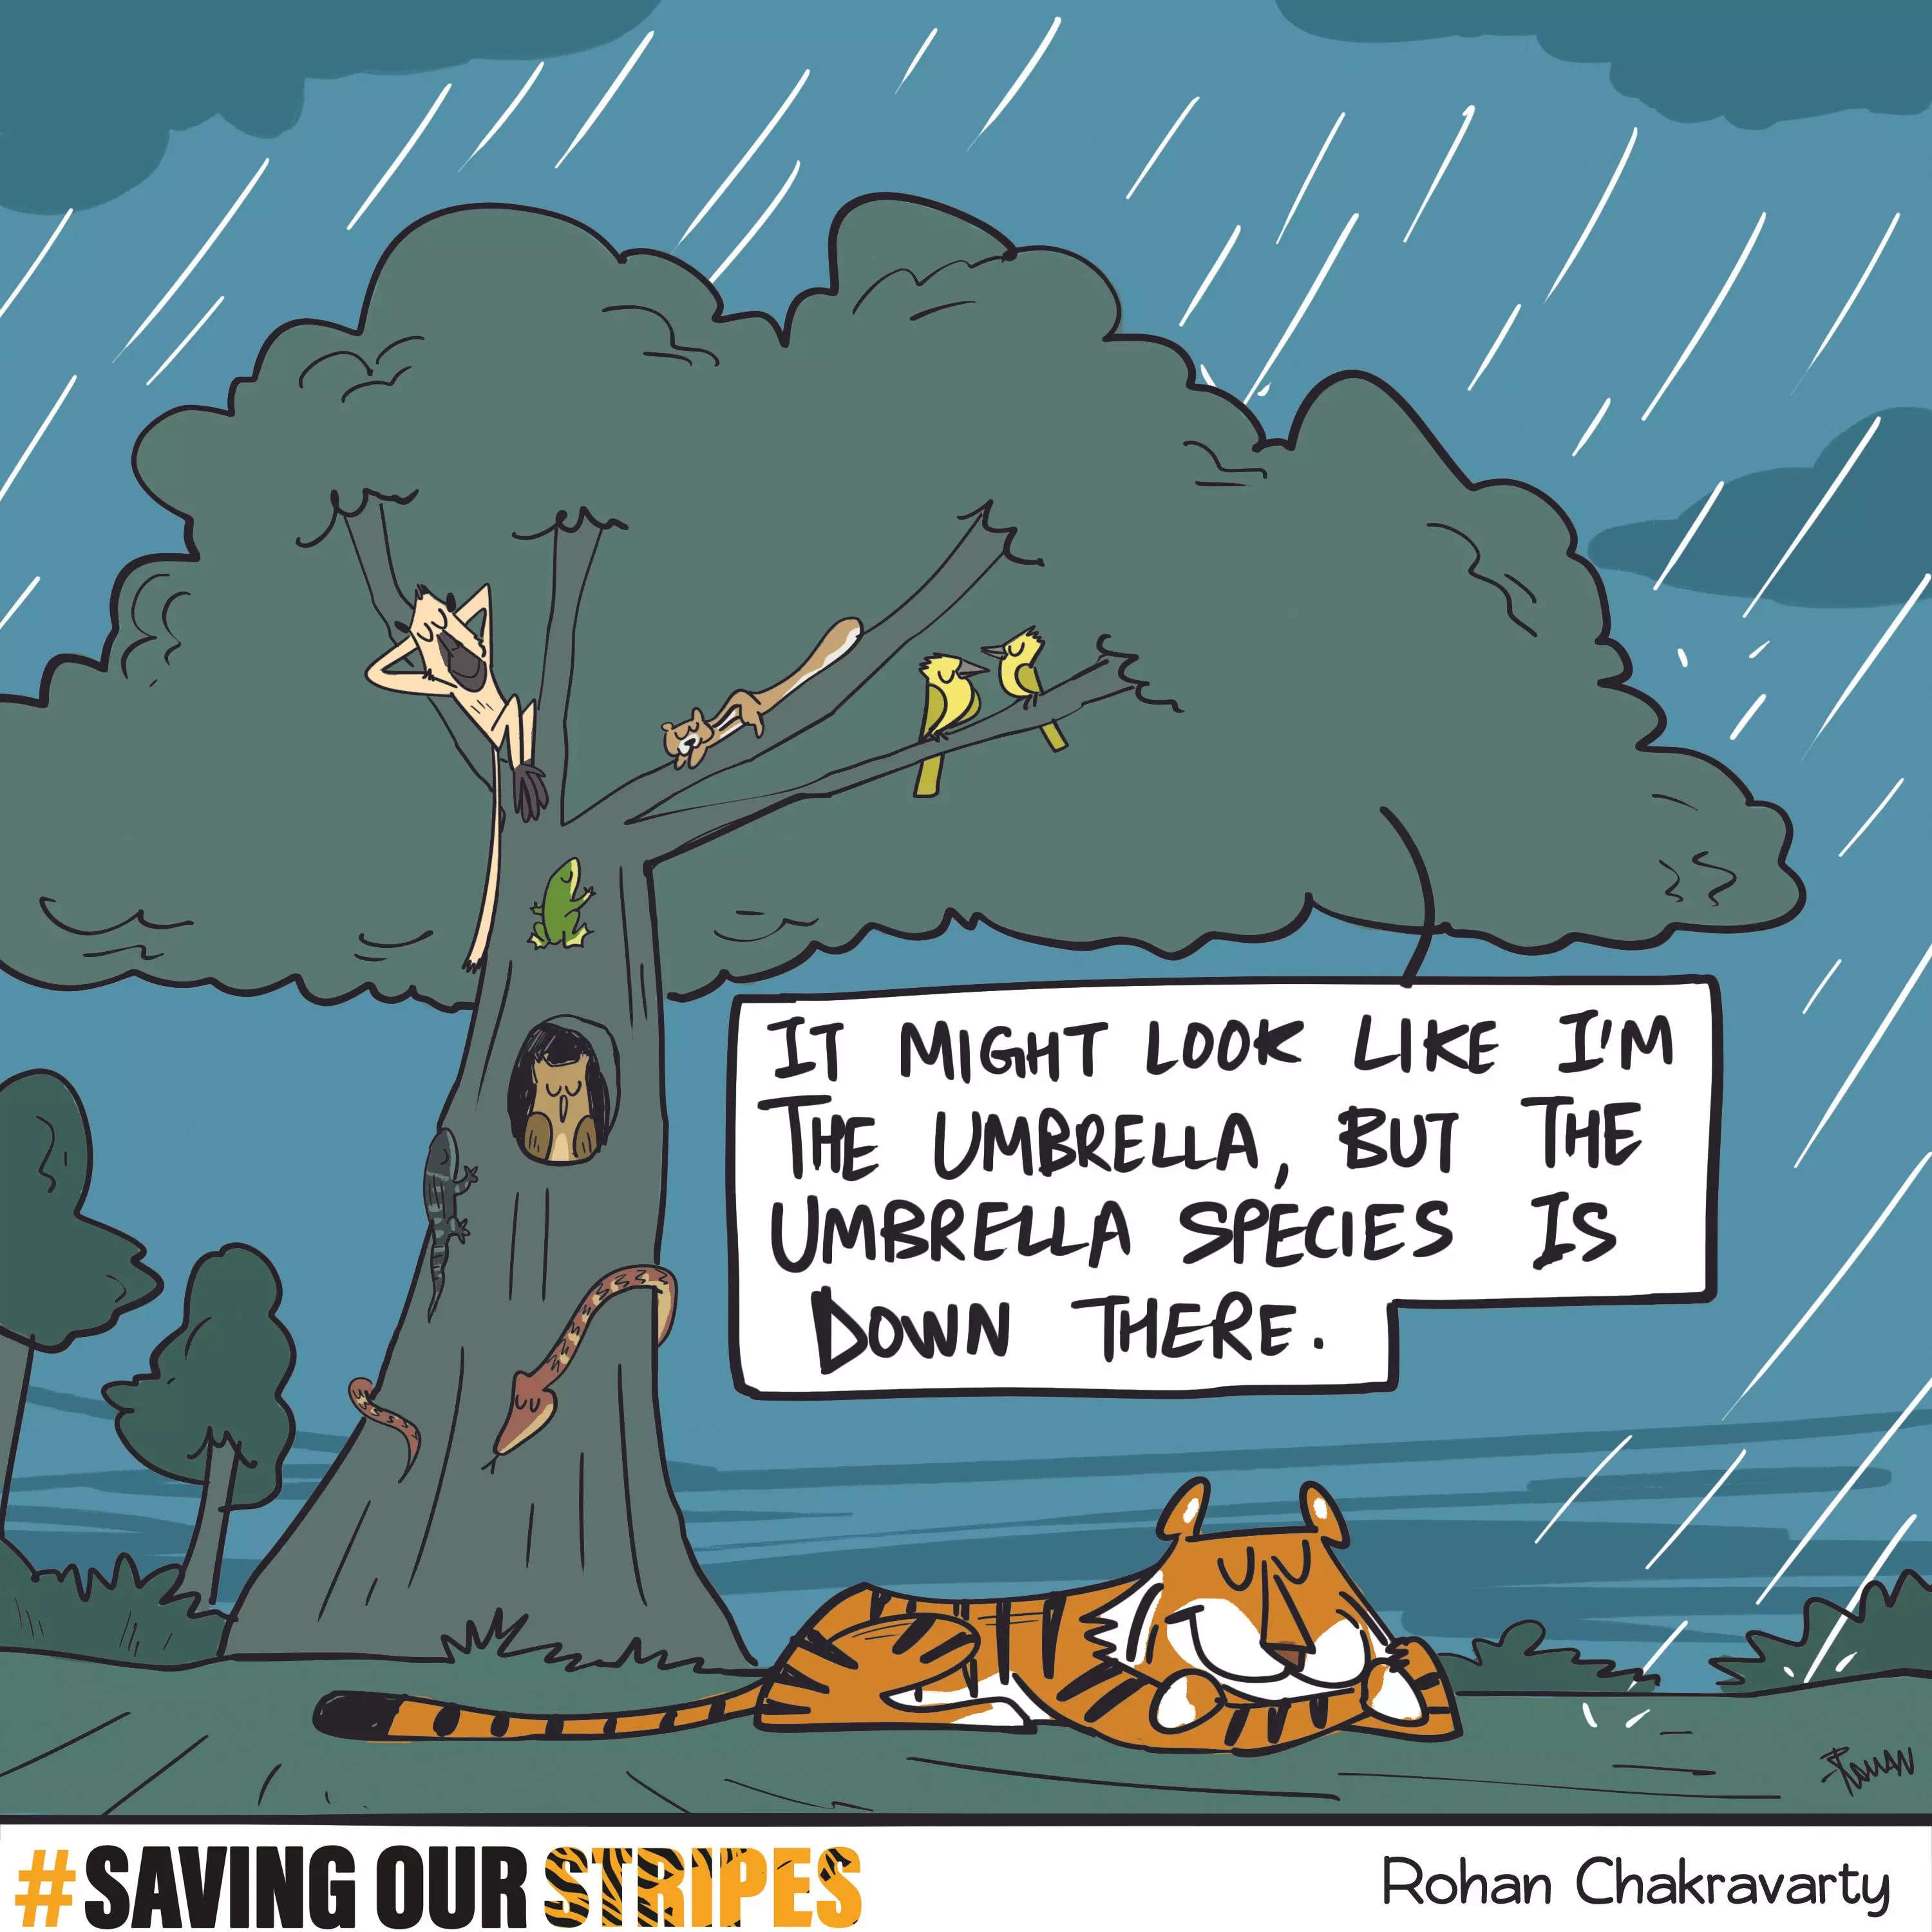 The tree may be the one with the leaves, but the tiger is the one making this forest come alive. Let's give them the recognition they deserve!